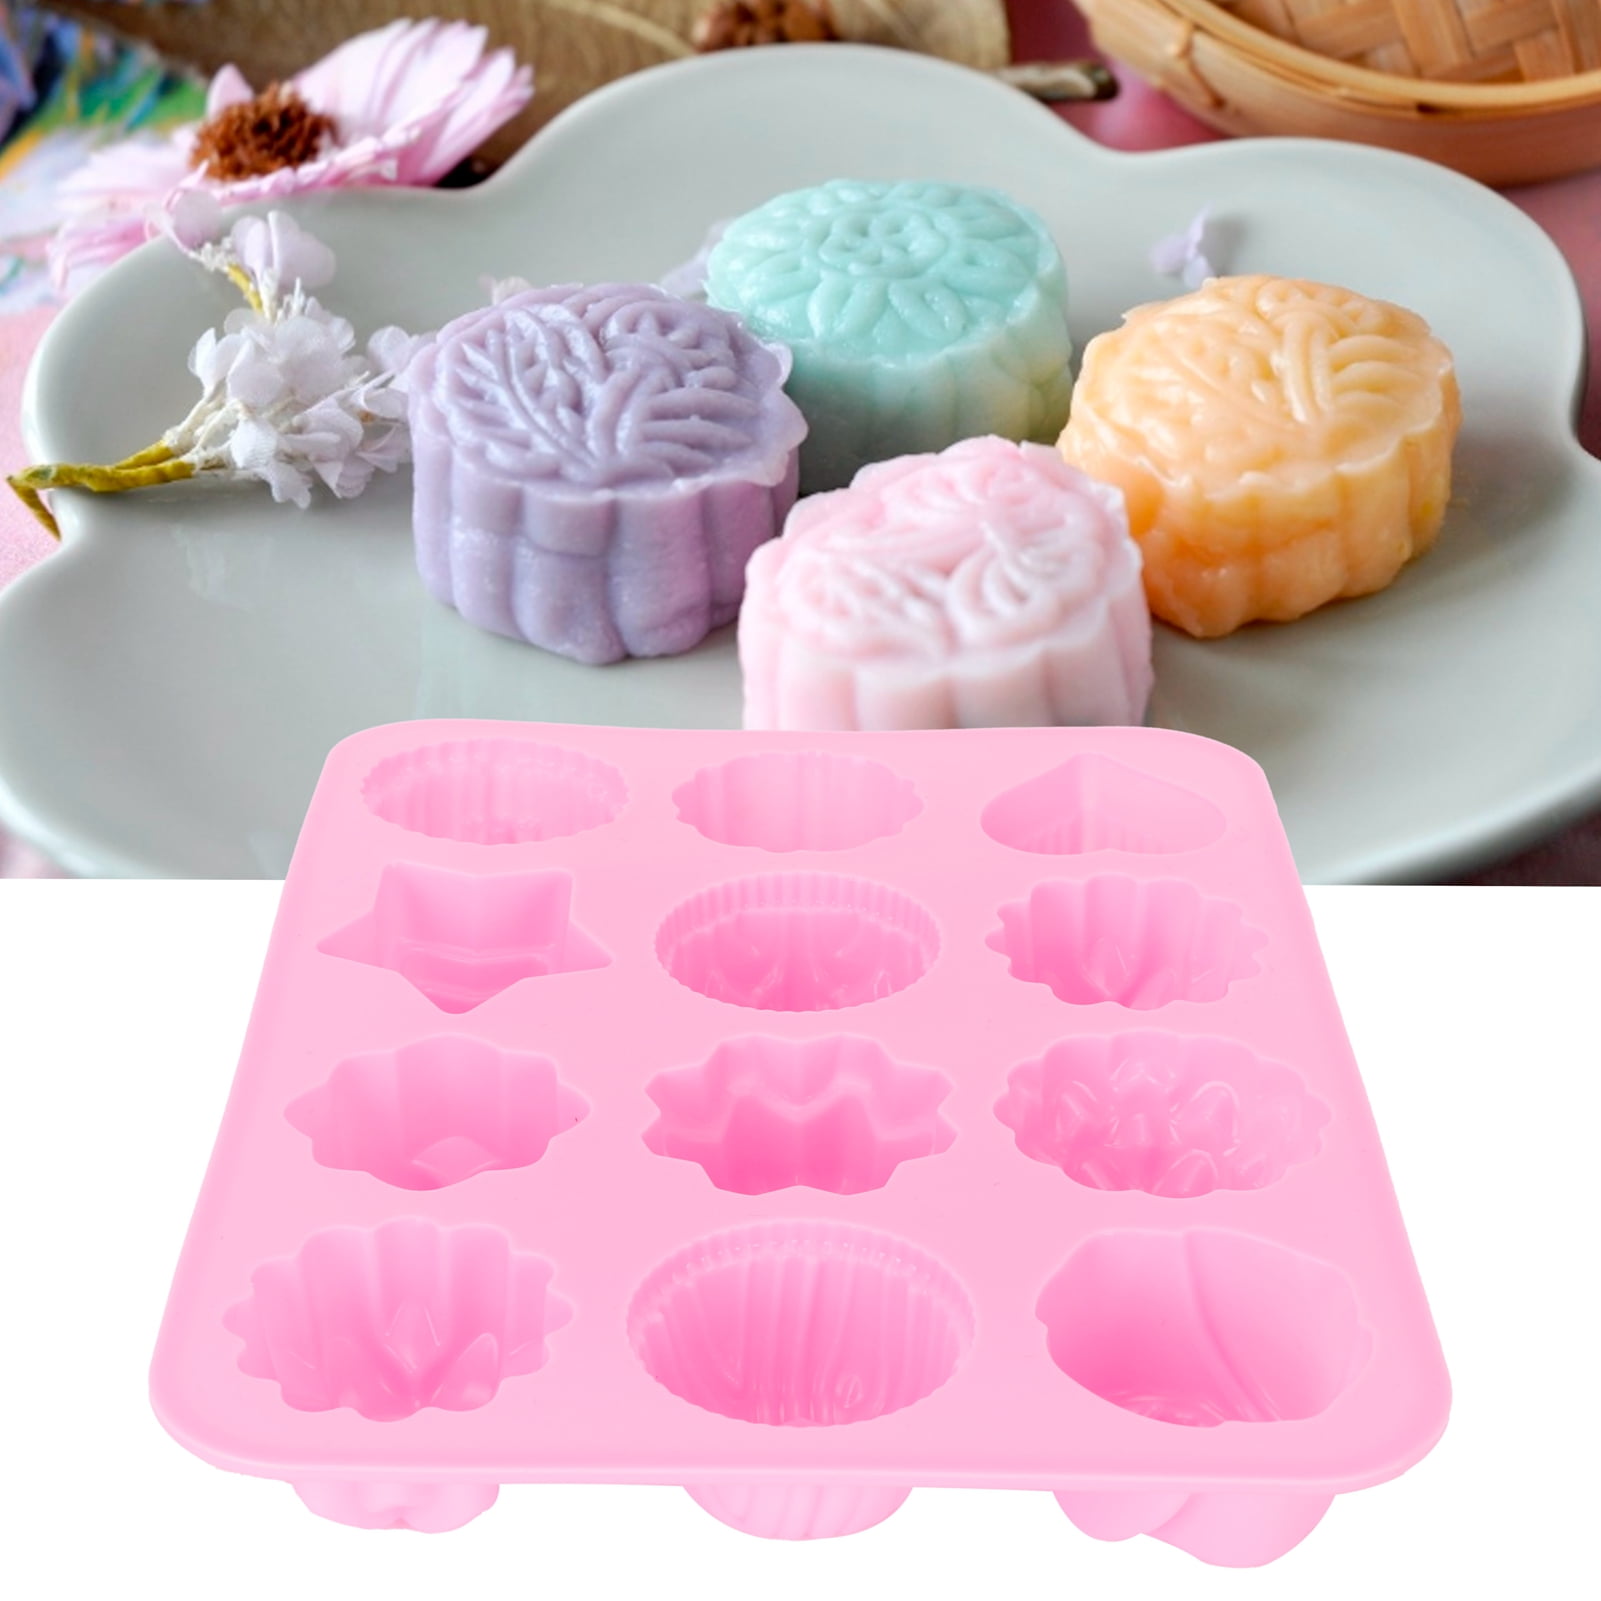 Details about   12-Grid Silicone Mold DIY Chocolate Cake Pudding Fondant Baking Home Use 